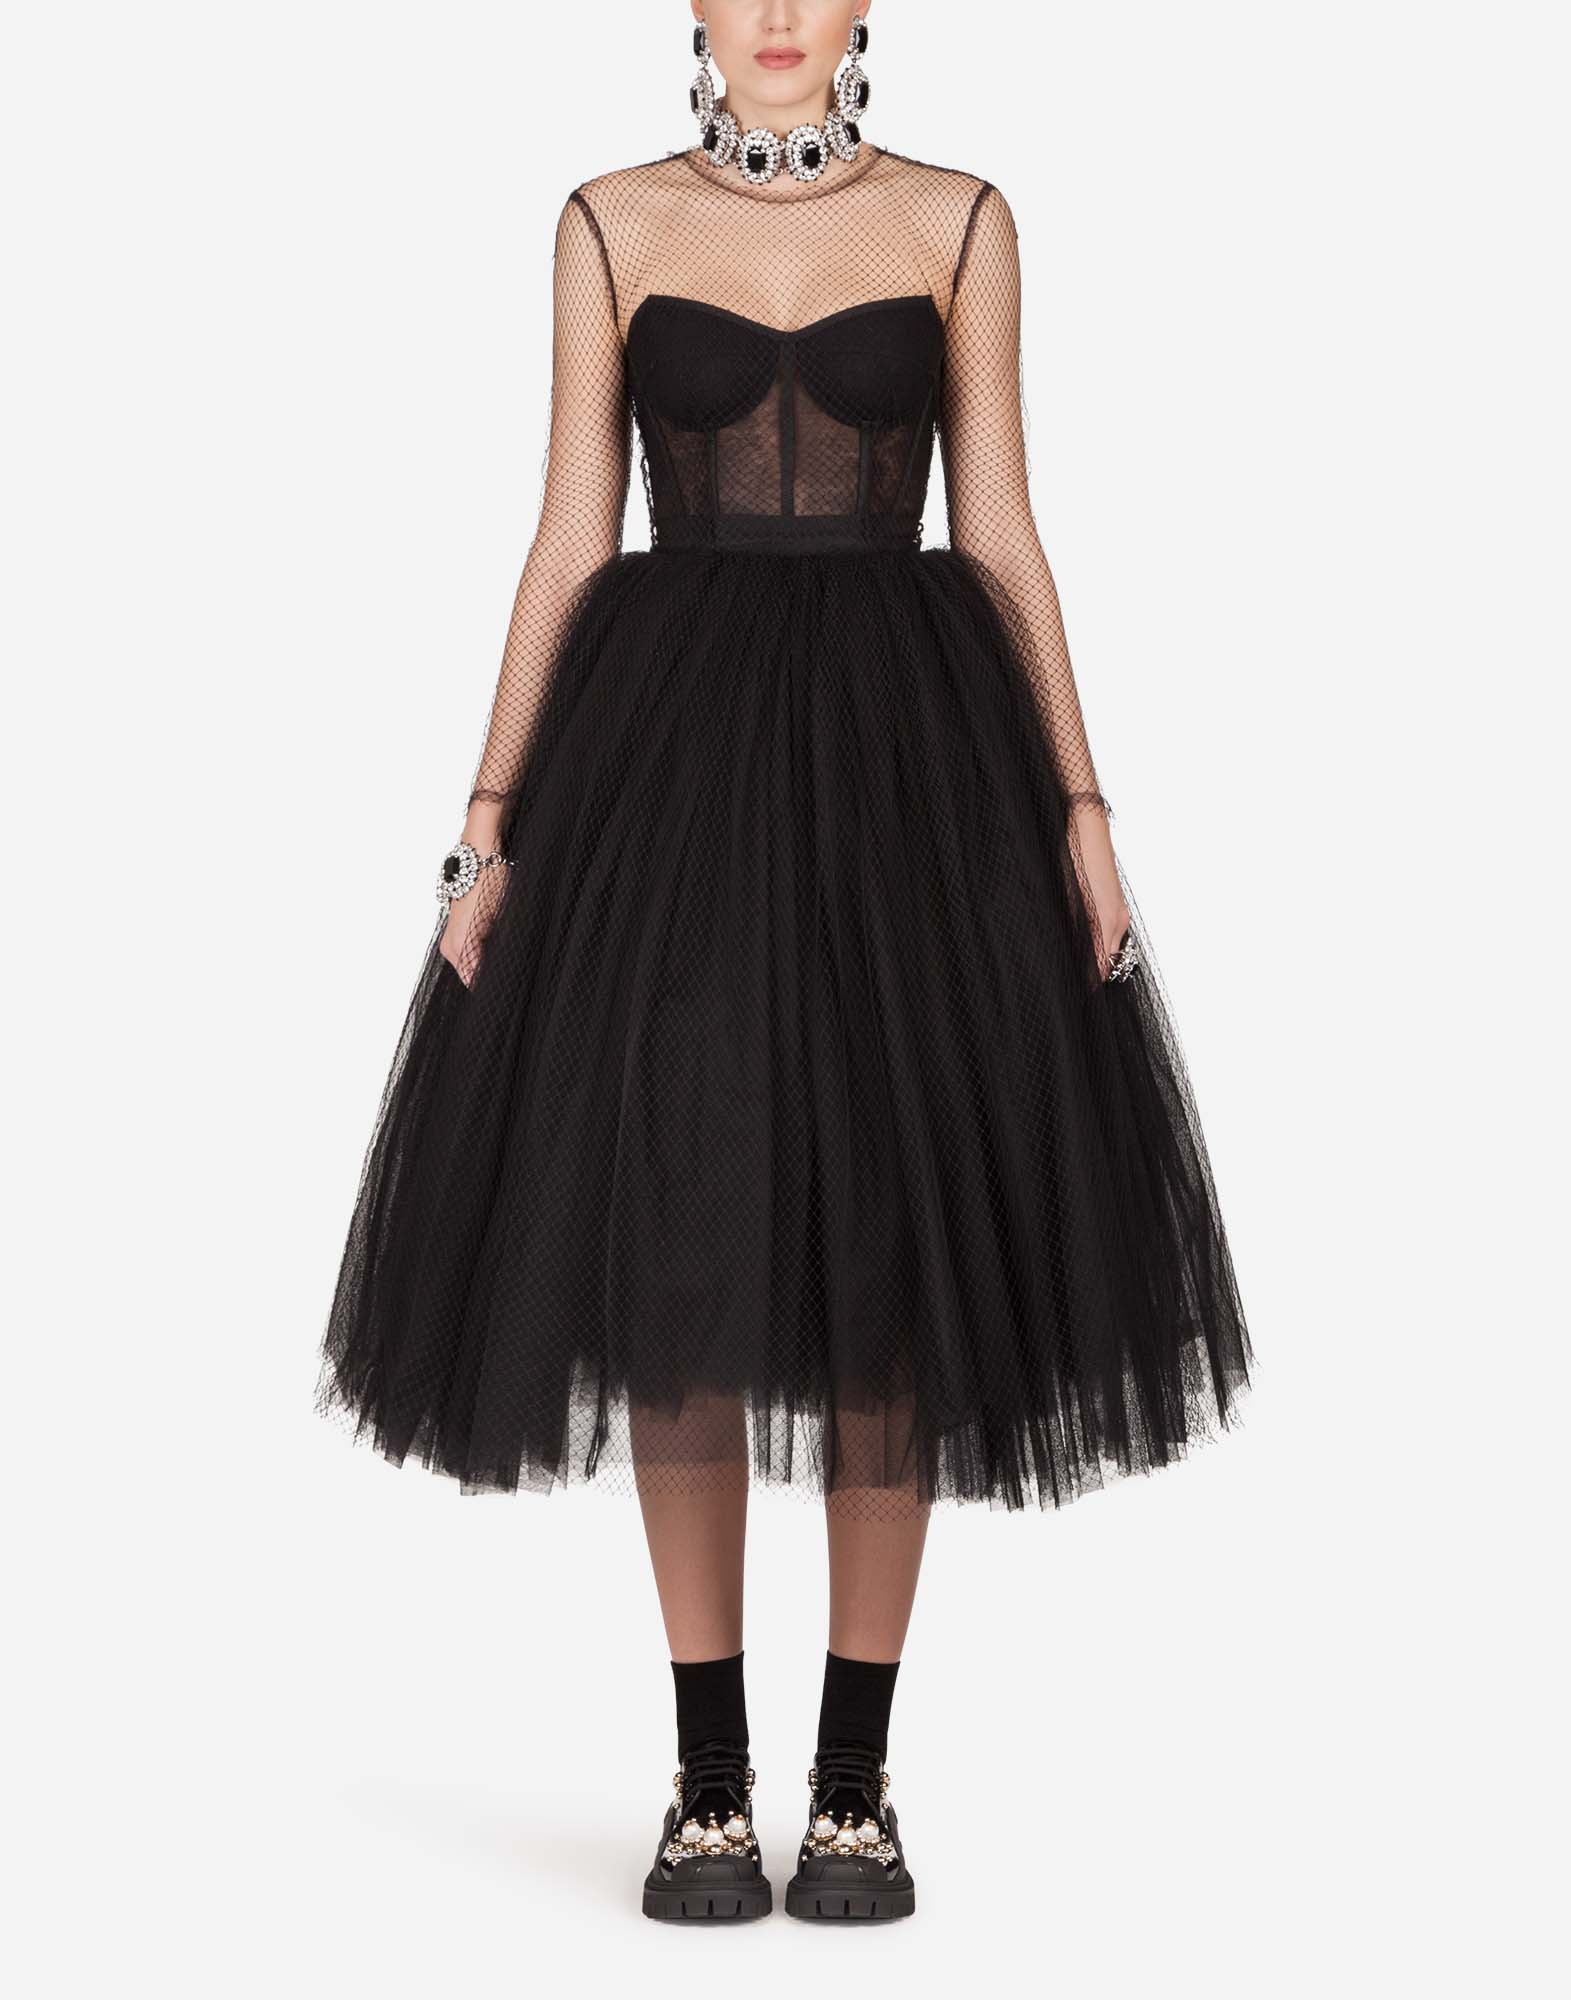 dolce and gabbana black tulle dress